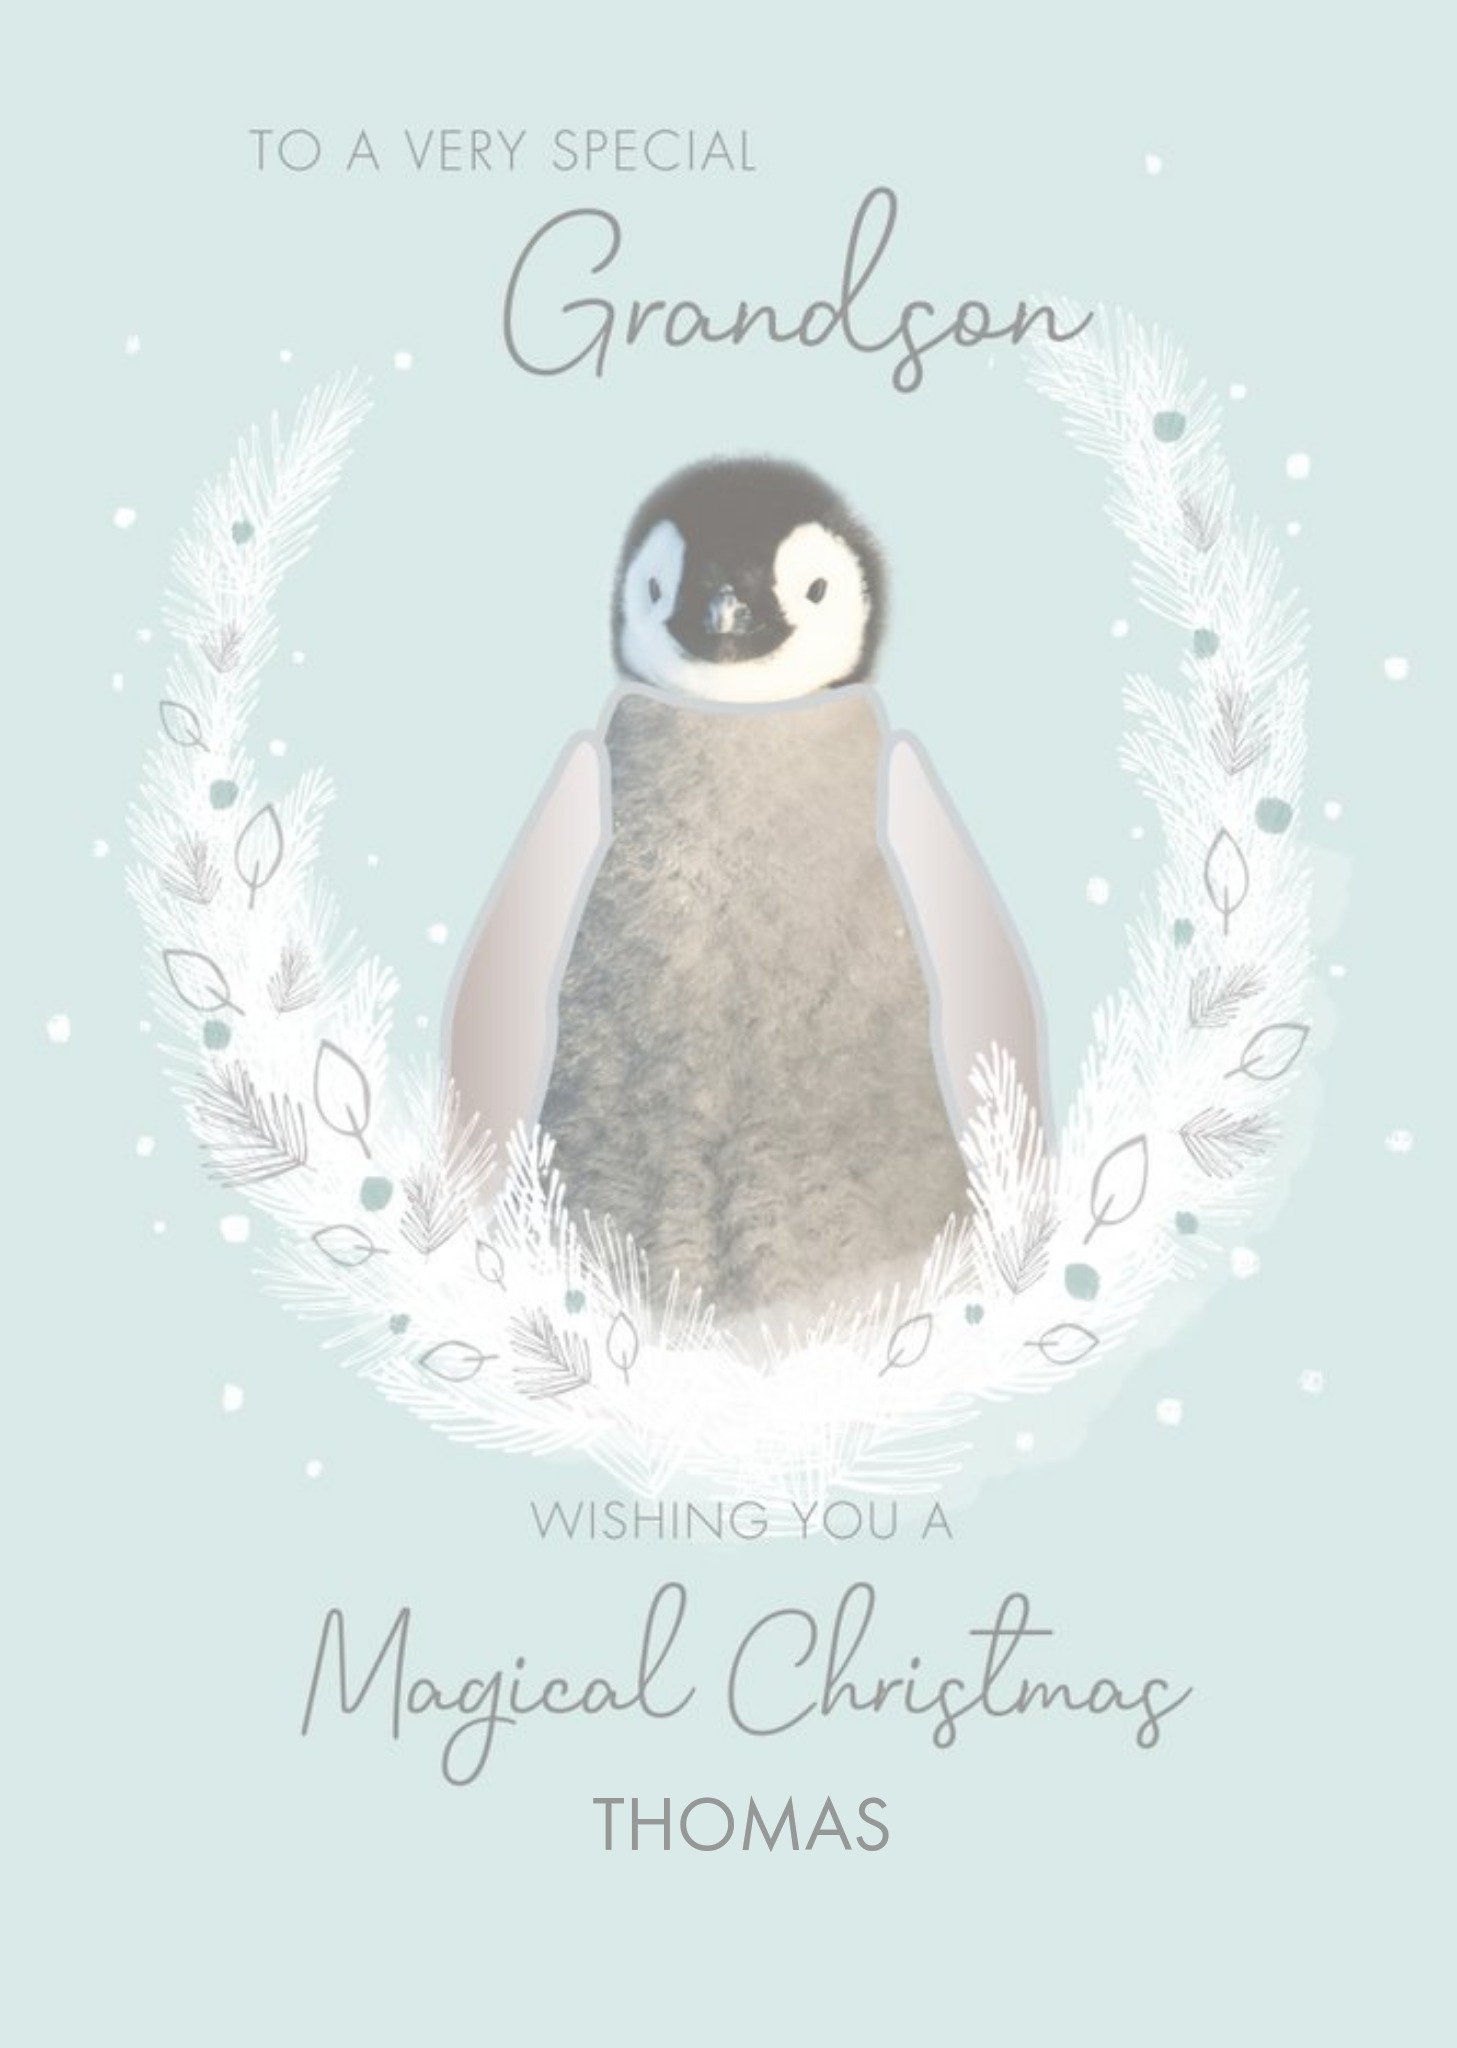 Moonpig Animal Planet Illustration Of Penguin In Snowy Wreath Grandson Christmas Card, Large